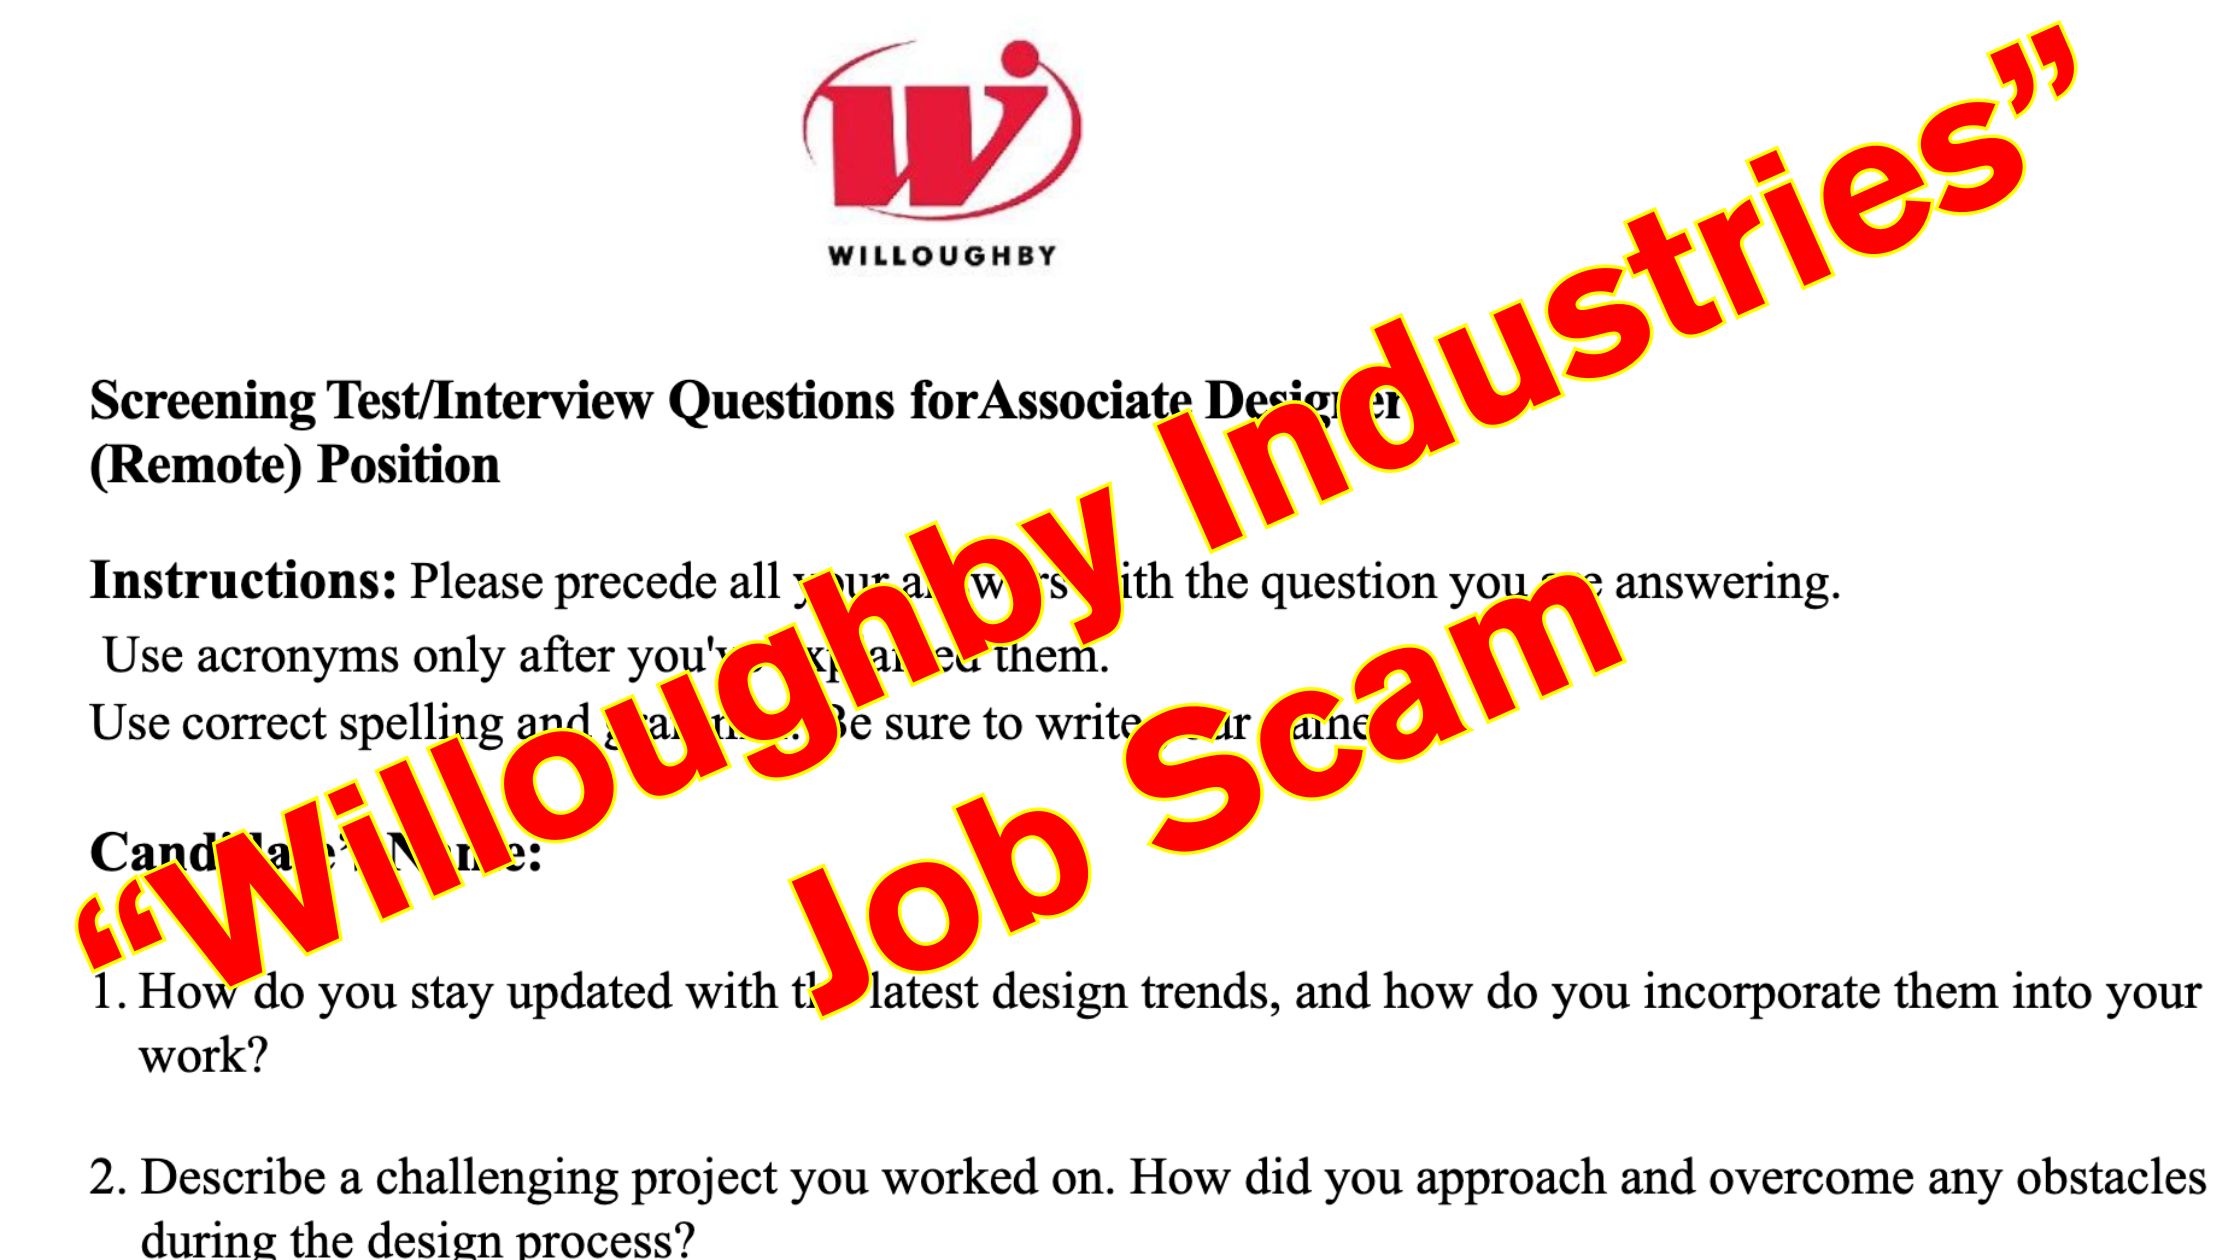 Fake Job Scam: “Willoughby Industries, Inc.”